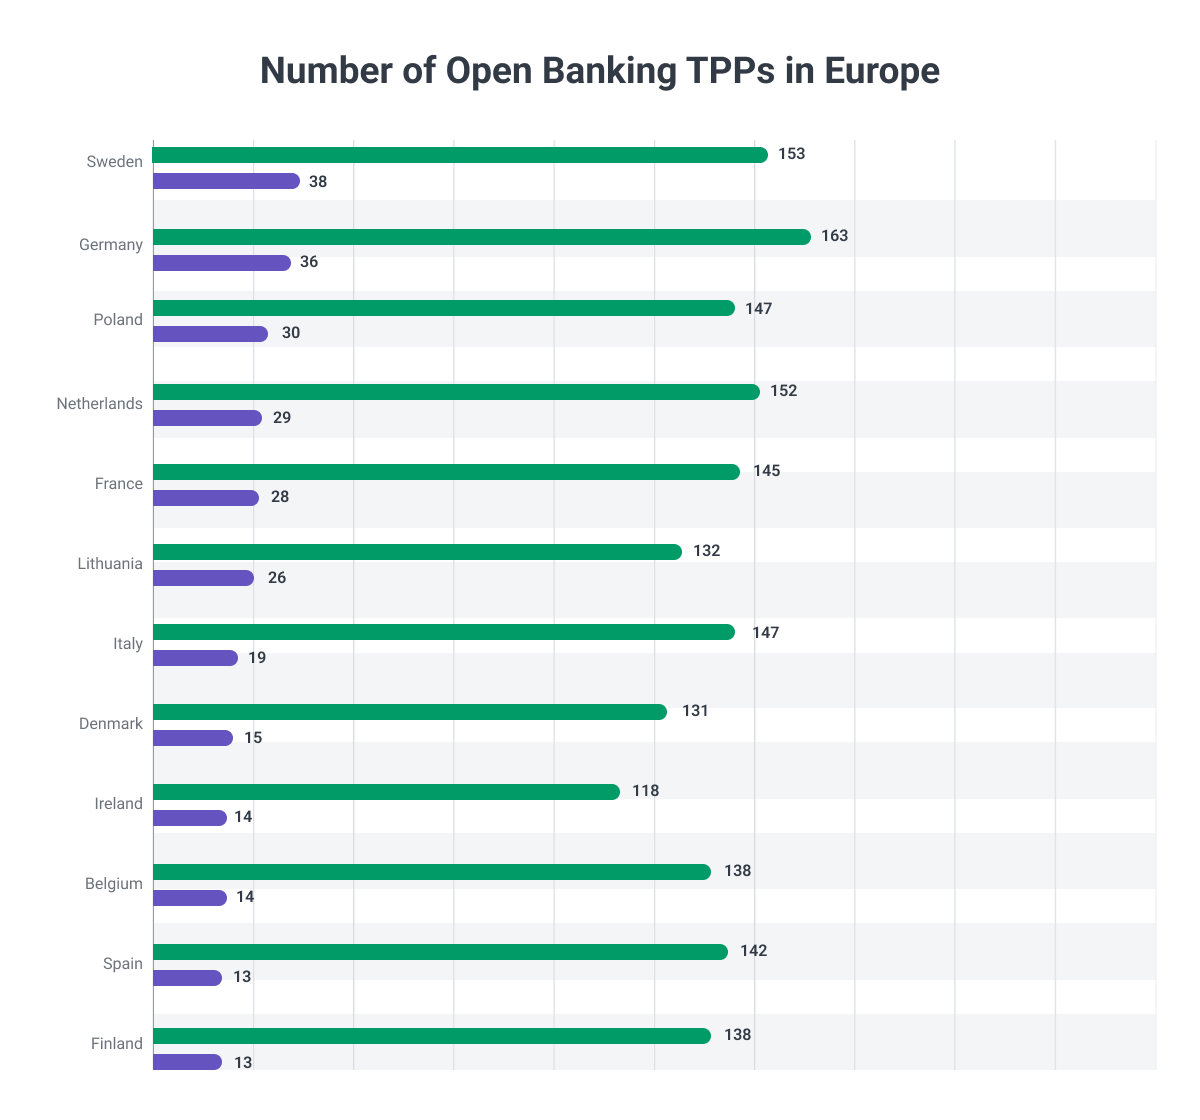 Number of Open Banking TPPs in Europe